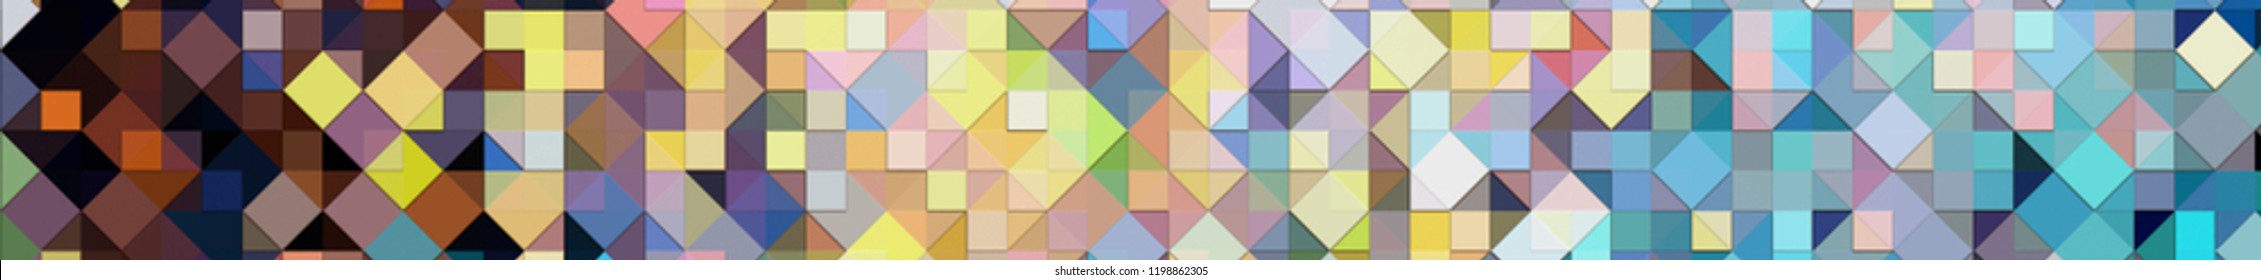 Panoramic multicolored background texture with mosaic. Geometric mosaic design. Abstract color trendy background. Mosaic texture with geometric shapes. - Shutterstock ID 1198862305